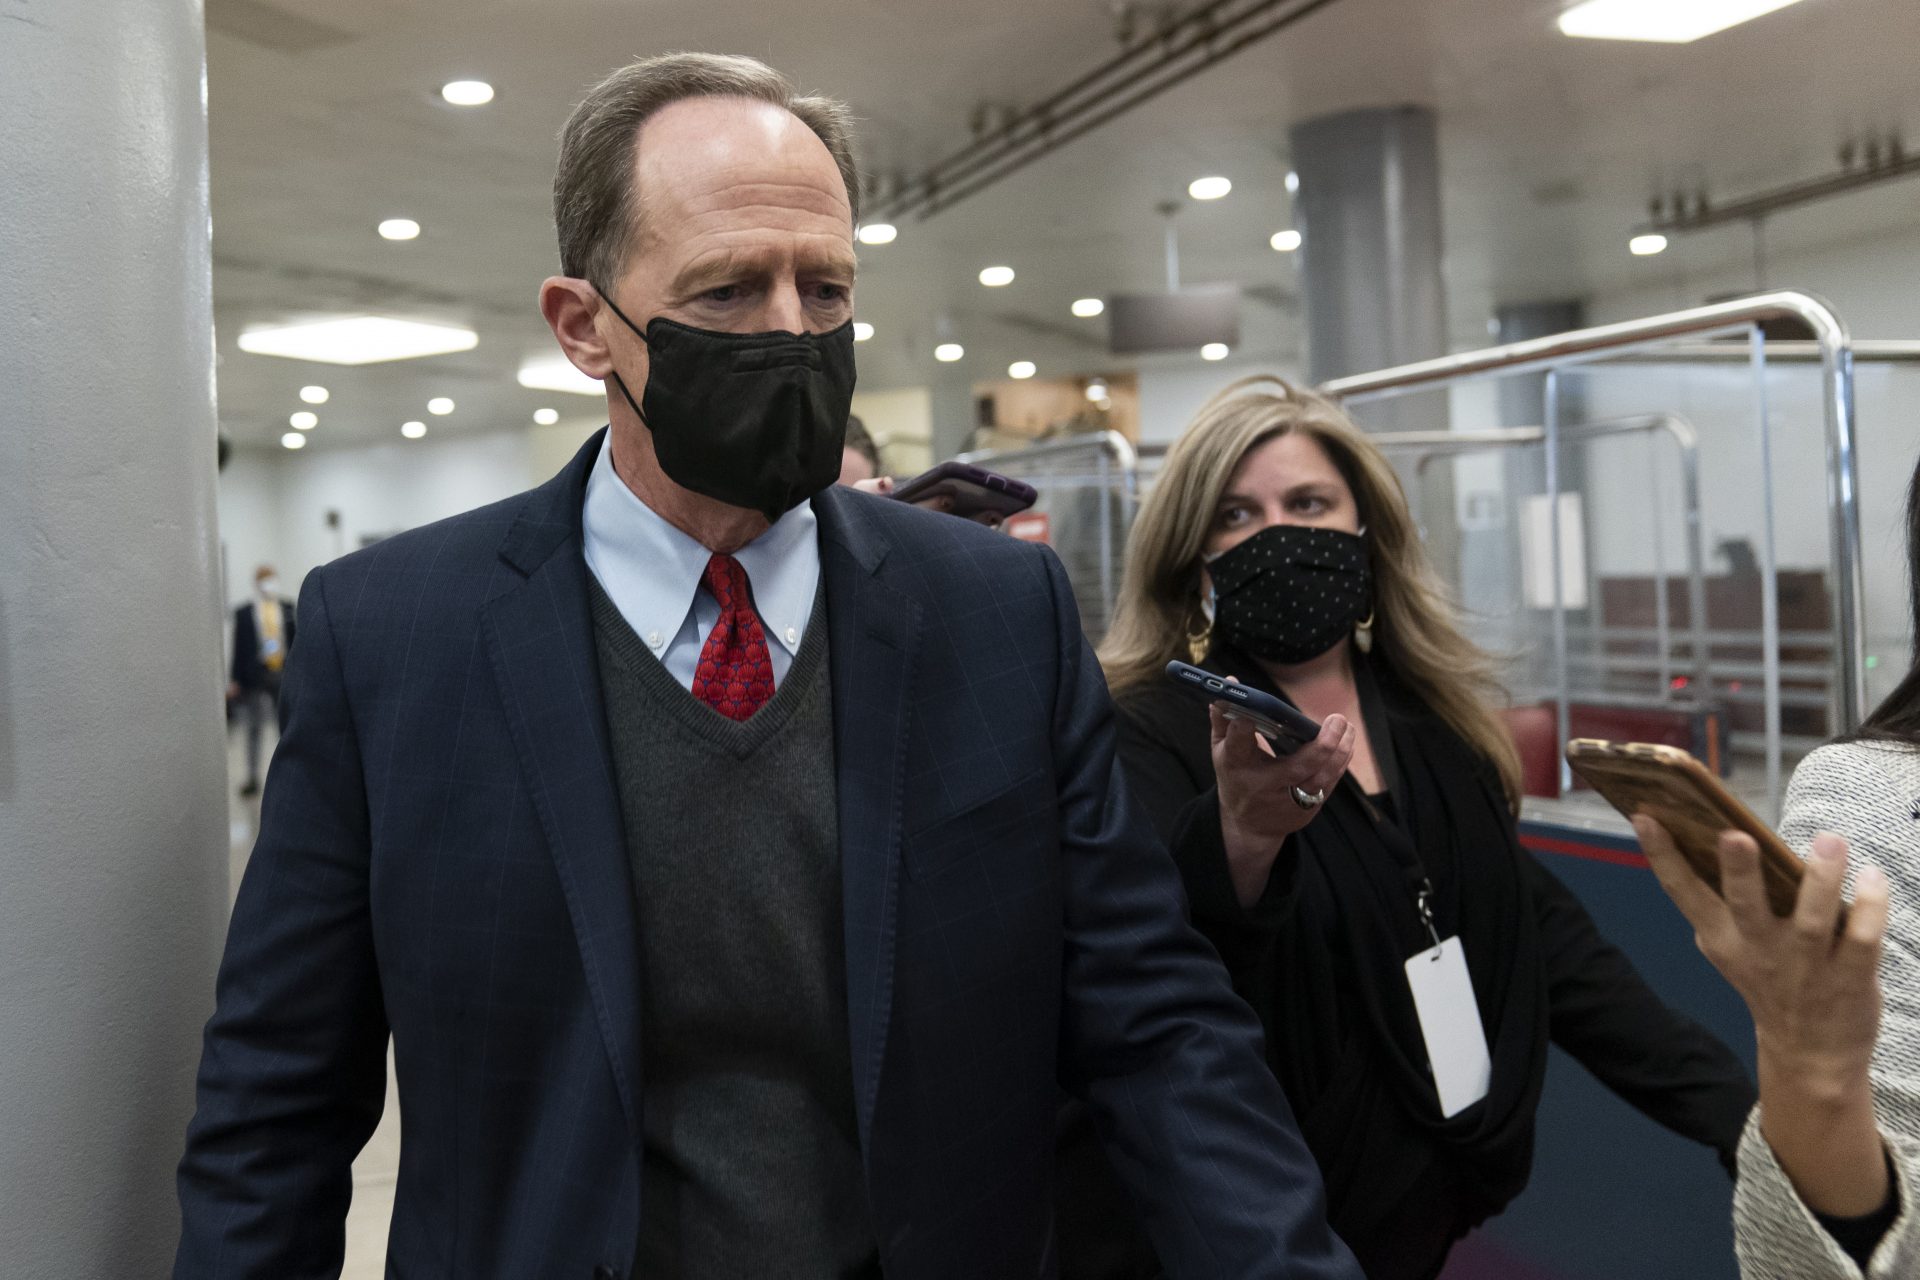 Sen. Pat Toomey, R-Pa., departs on Capitol Hill in Washington, Saturday, Feb. 13, 2021, after the Senate acquitted former President Donald Trump in his second impeachment trial in the Senate at the U.S. Capitol in Washington, Saturday, Feb. 13, 2021. Trump was accused of inciting the Jan. 6 attack on the U.S. Capitol, and the acquittal gives him a historic second victory in the court of impeachment.